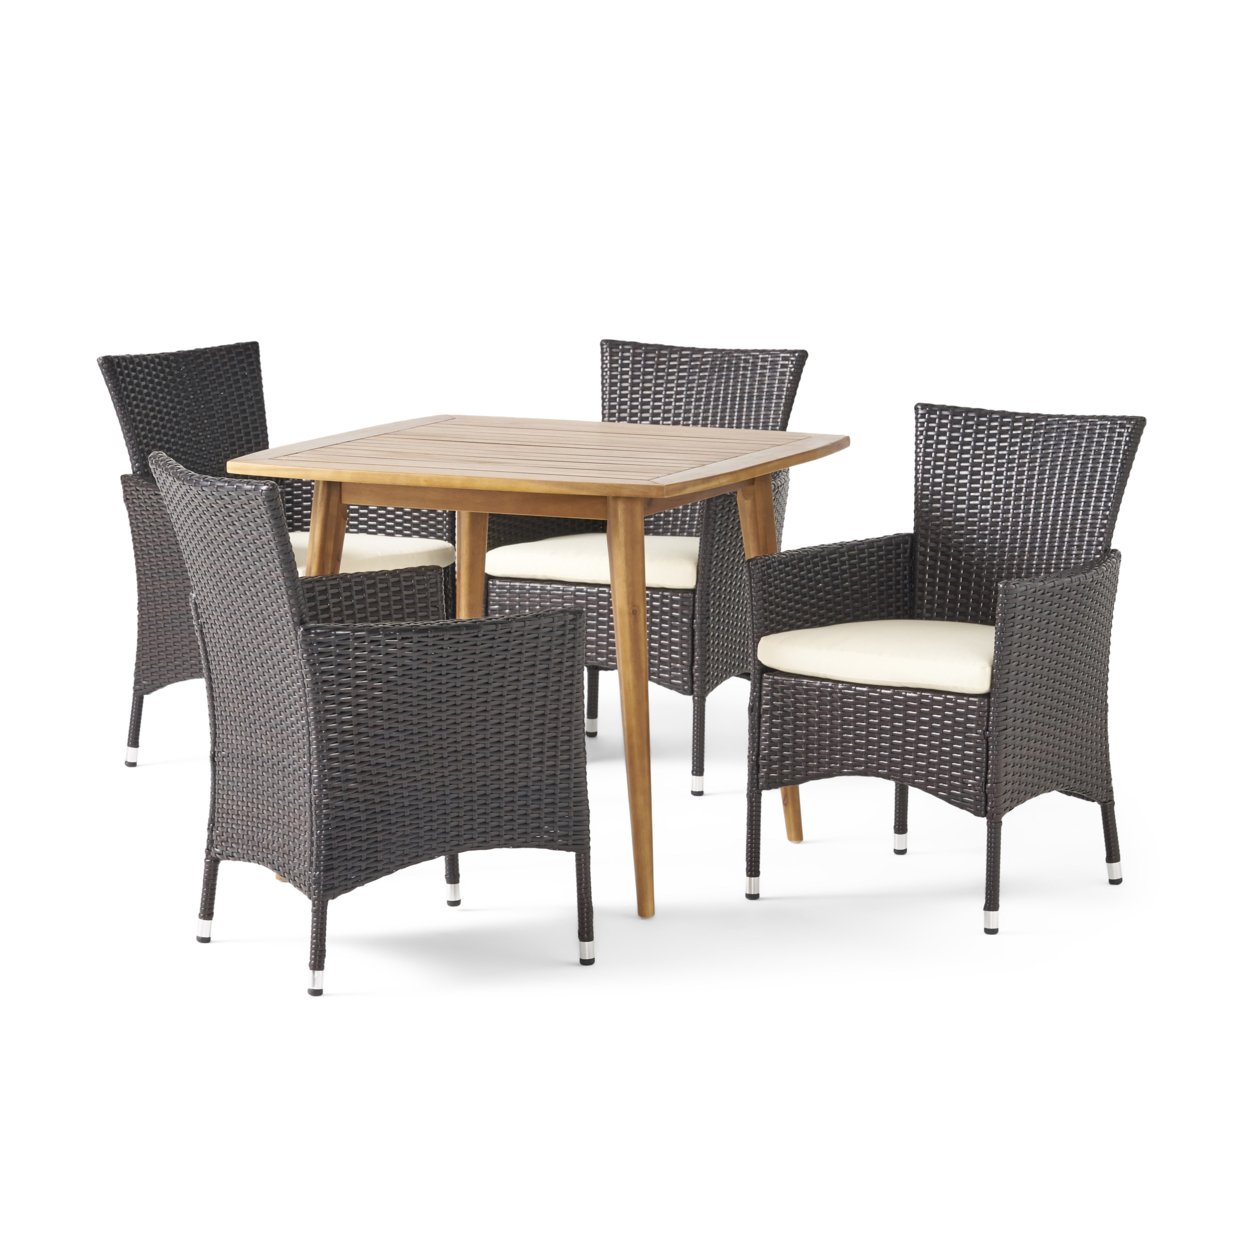 Knox Outdoor 5 Piece Wood And Wicker Dining Set, Teak And Multi Brown